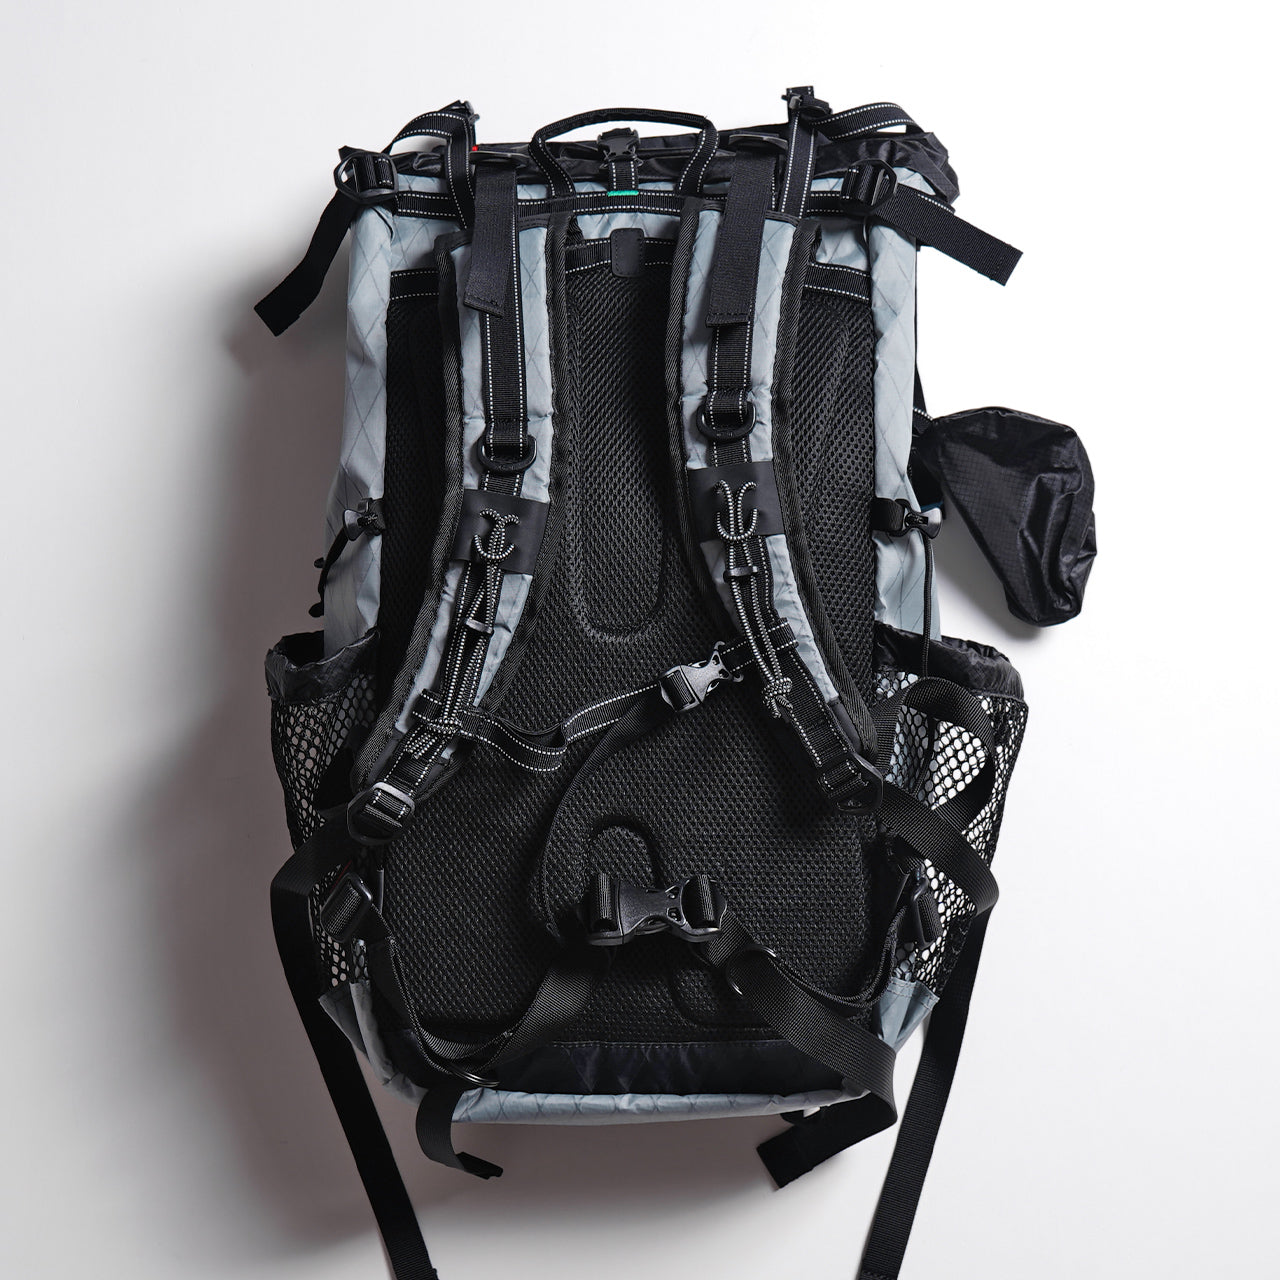 and wander アンドワンダー エックスパック 30リットル バックパック X-Pac 30L backpack 5743975089【送料無料】